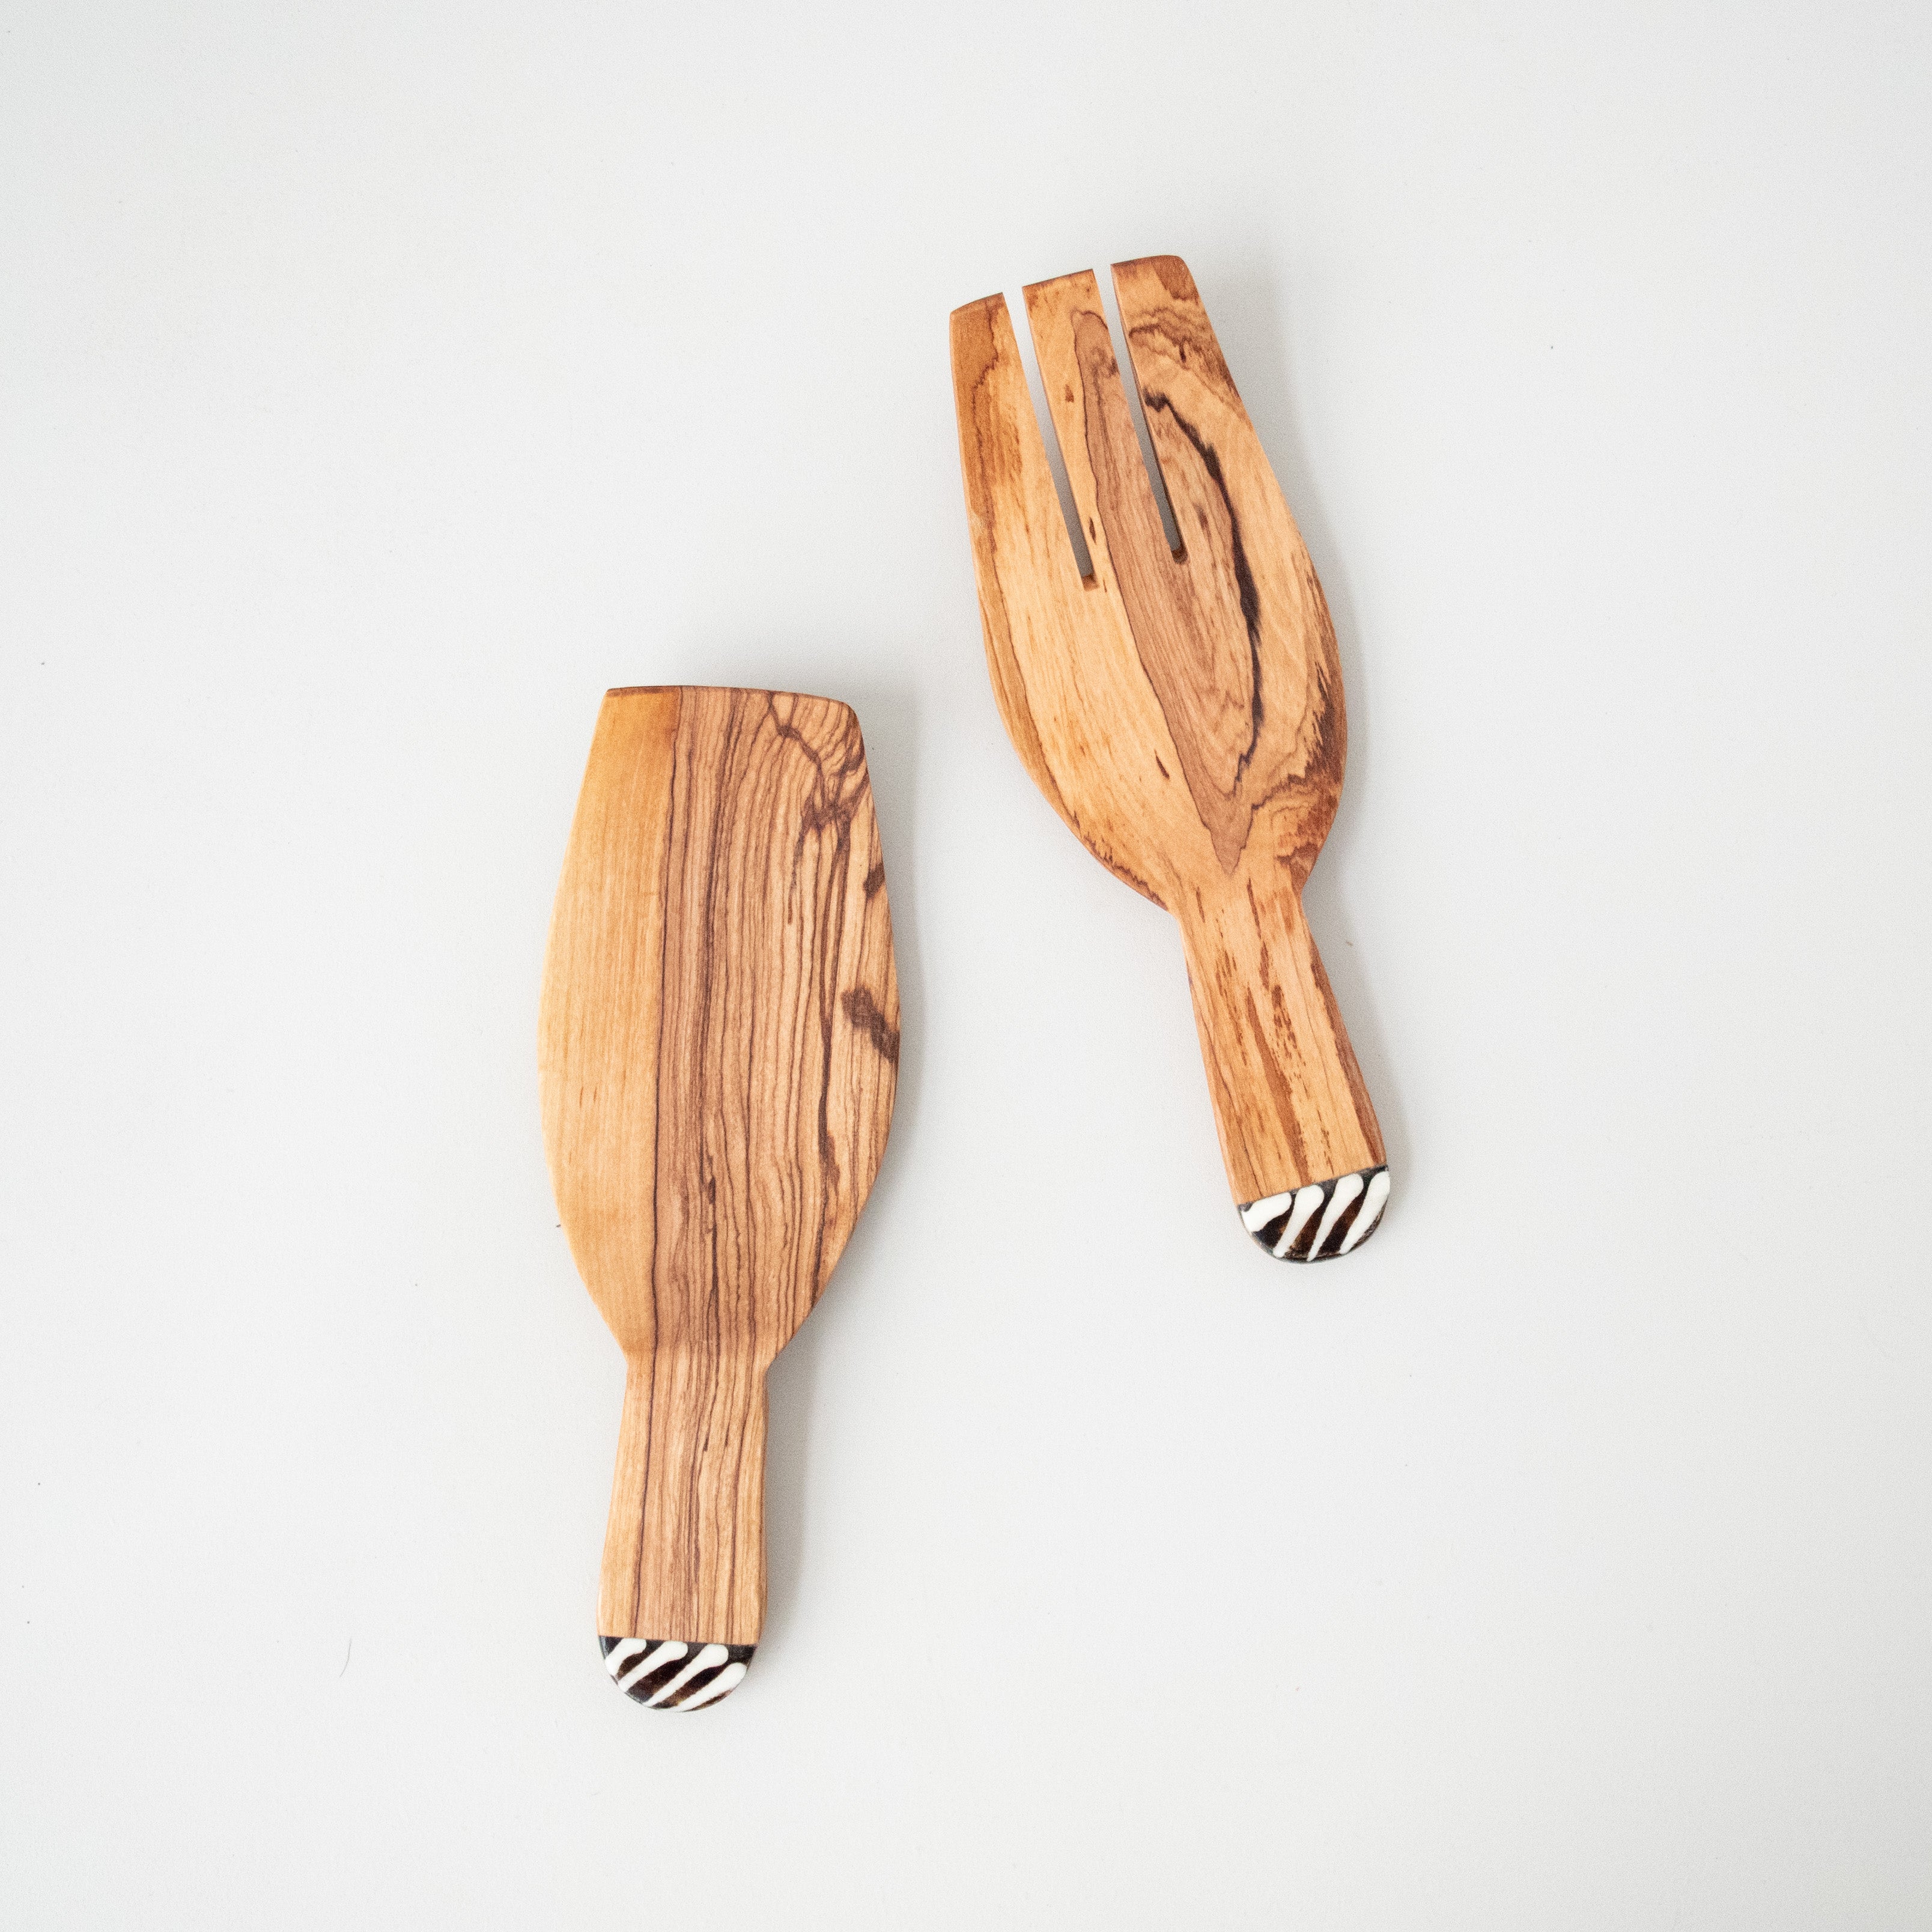 Claw Spoon Set - handmade from Kenyan olive wood by market artisans for a Fair Trade boutique